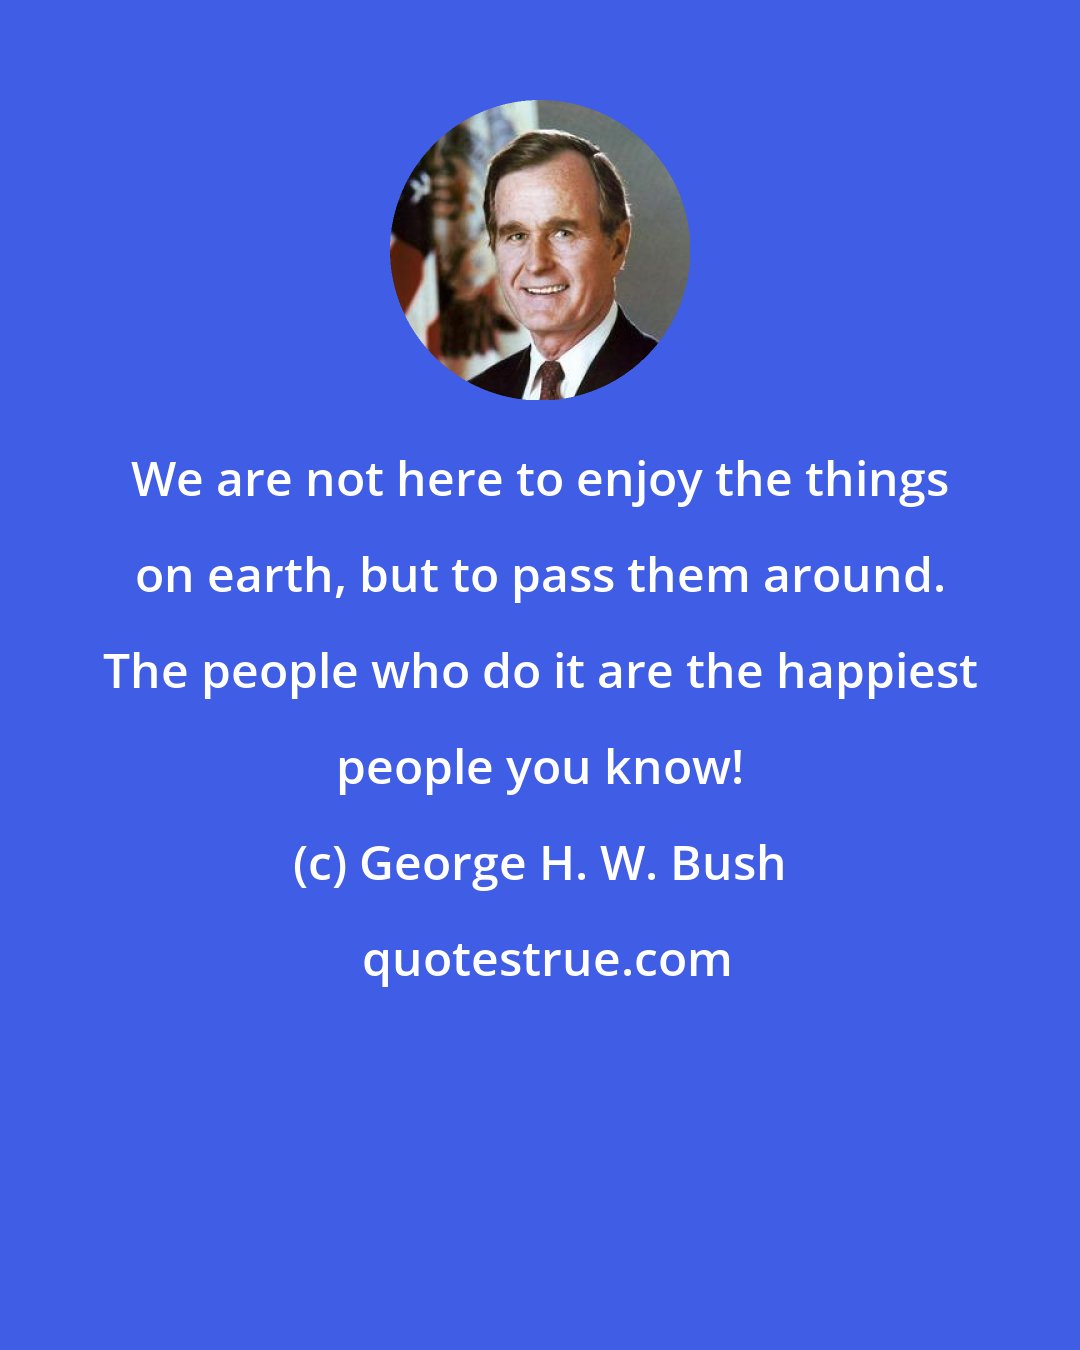 George H. W. Bush: We are not here to enjoy the things on earth, but to pass them around. The people who do it are the happiest people you know!